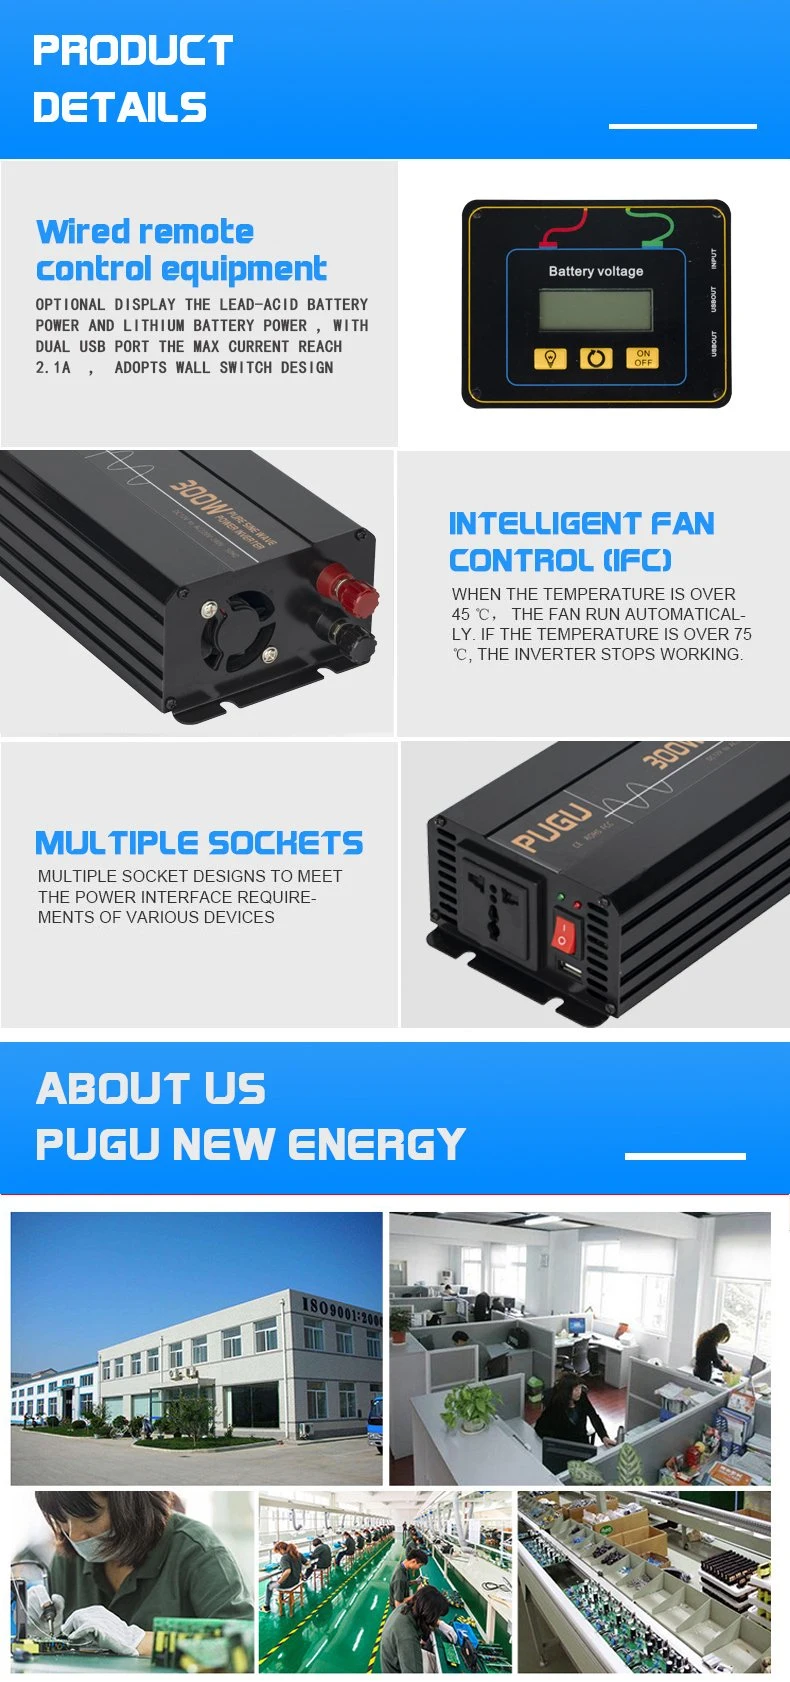 300W Power Inverter for Car Use